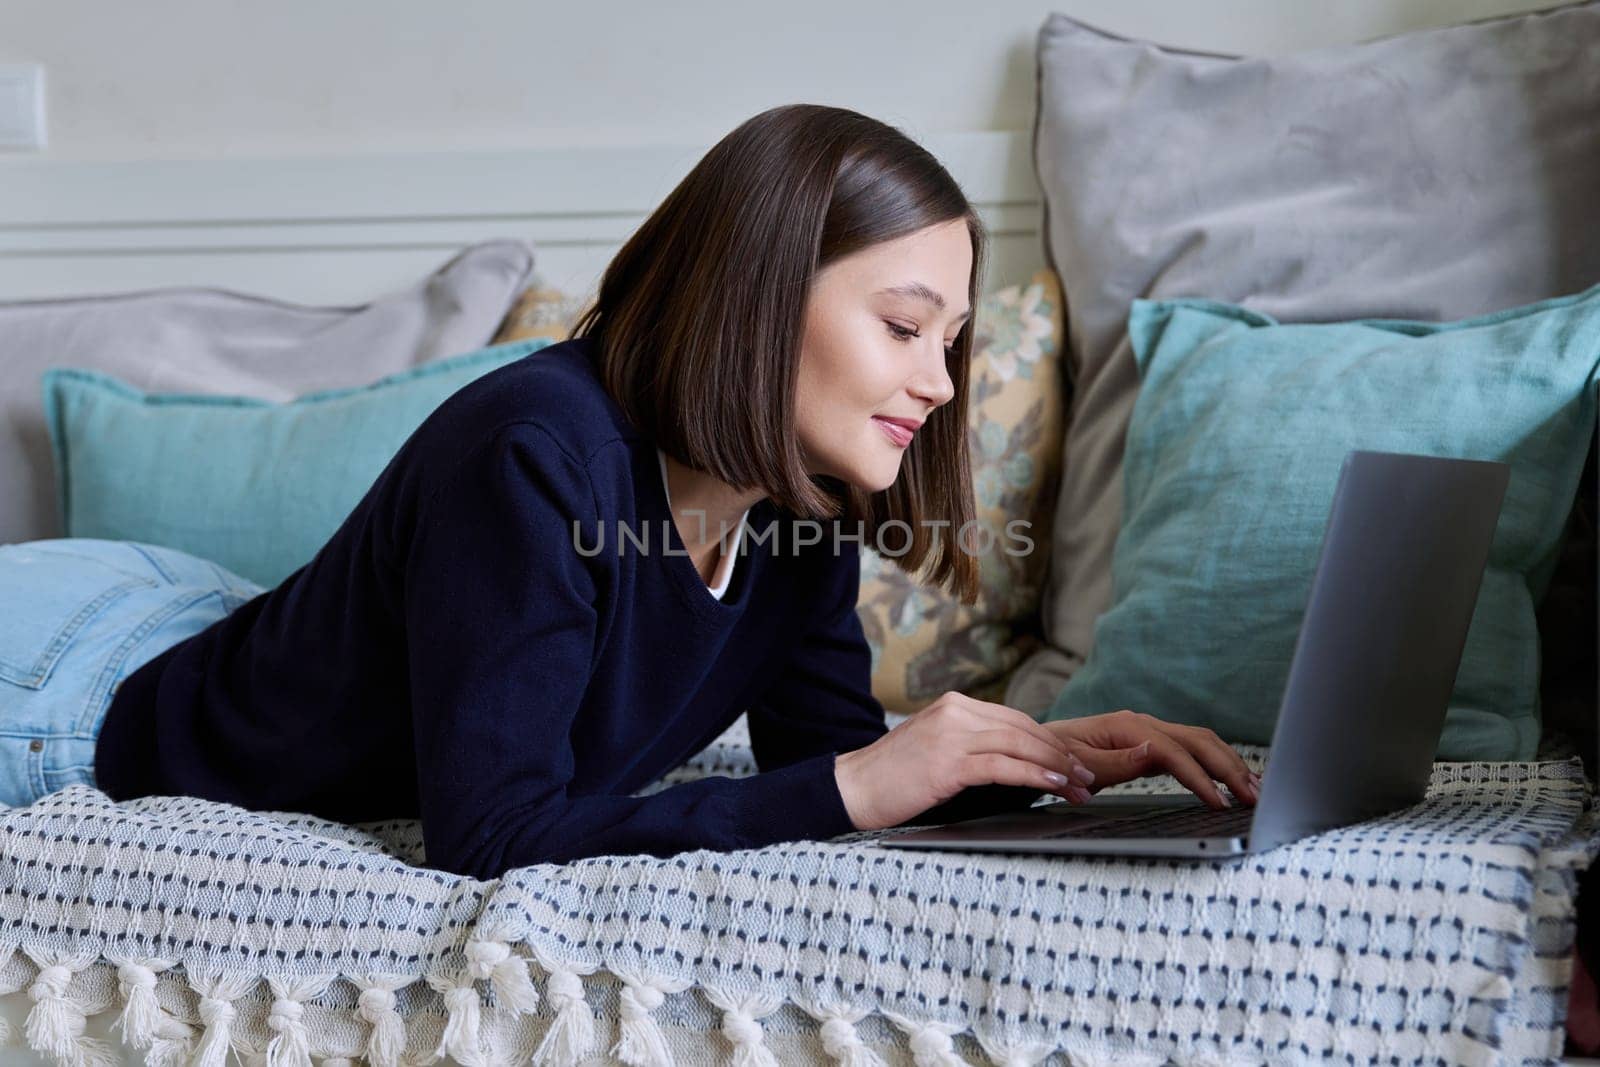 Young woman using laptop computer, typing on keyboard, lying on sofa at home. Internet online technologies for work communication study leisure